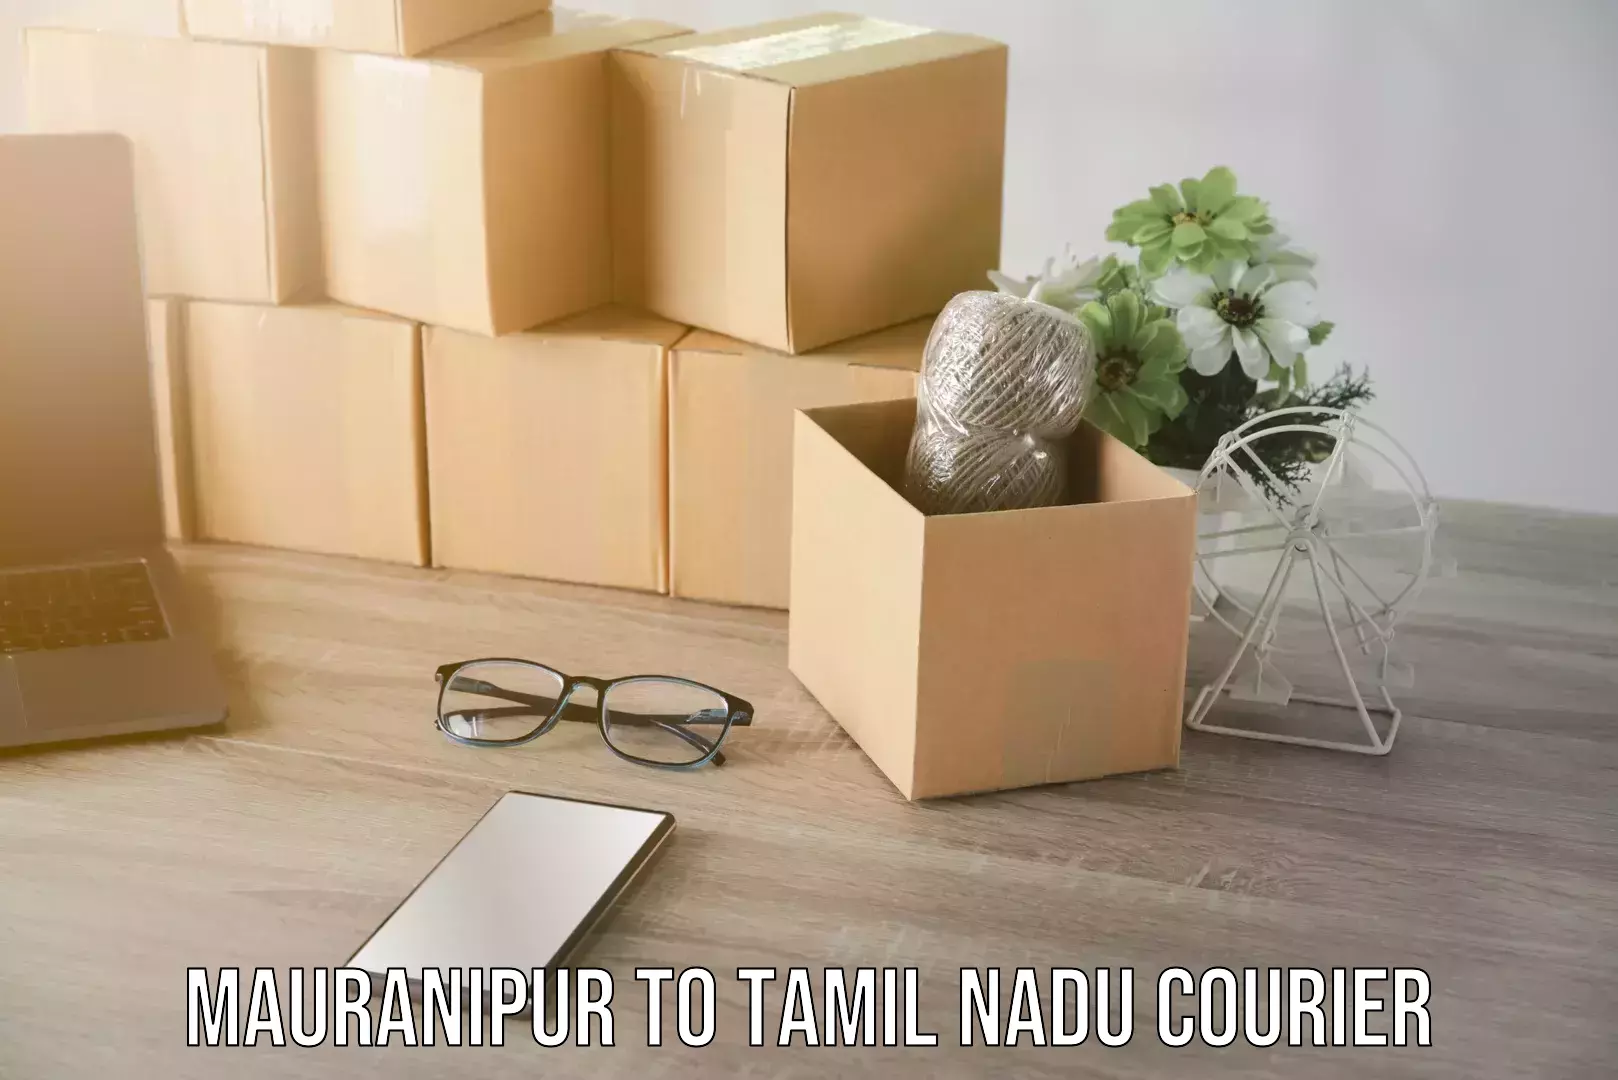 Hassle-free relocation Mauranipur to Tamil Nadu